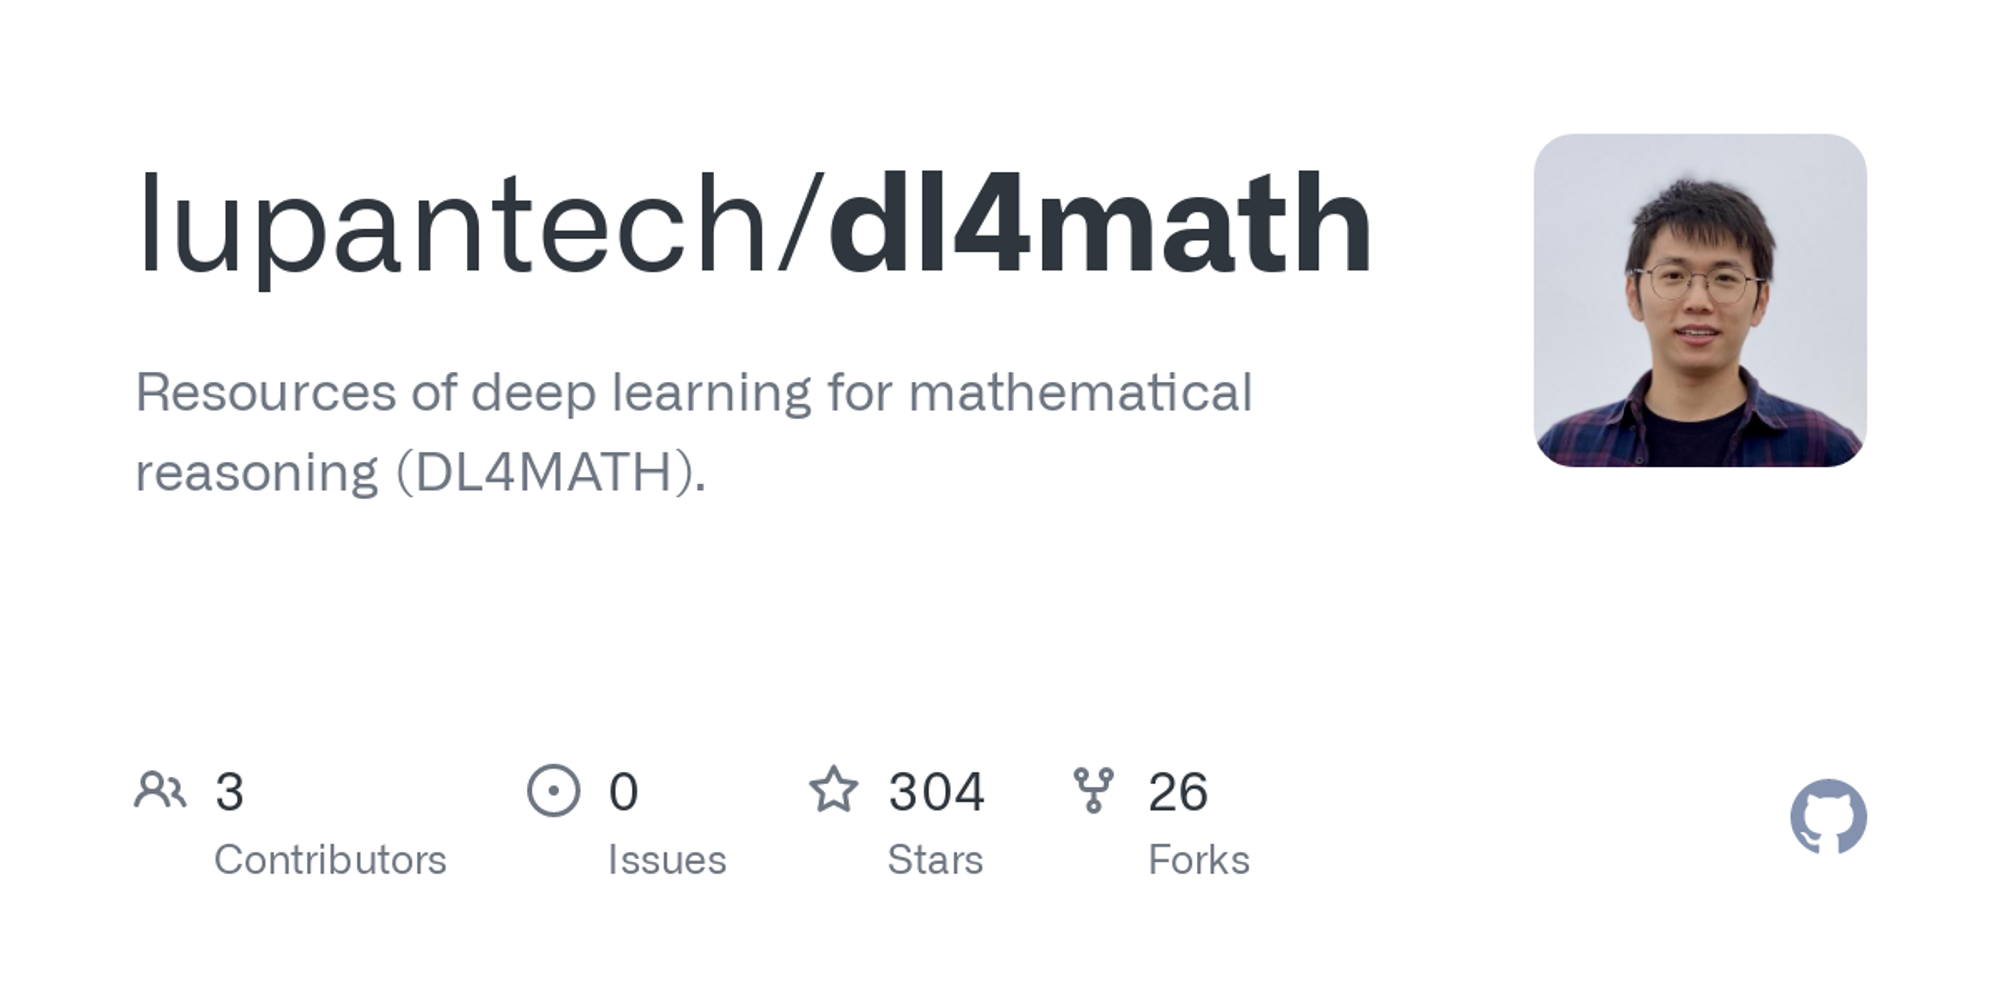 GitHub - lupantech/dl4math: Resources of deep learning for mathematical reasoning (DL4MATH).